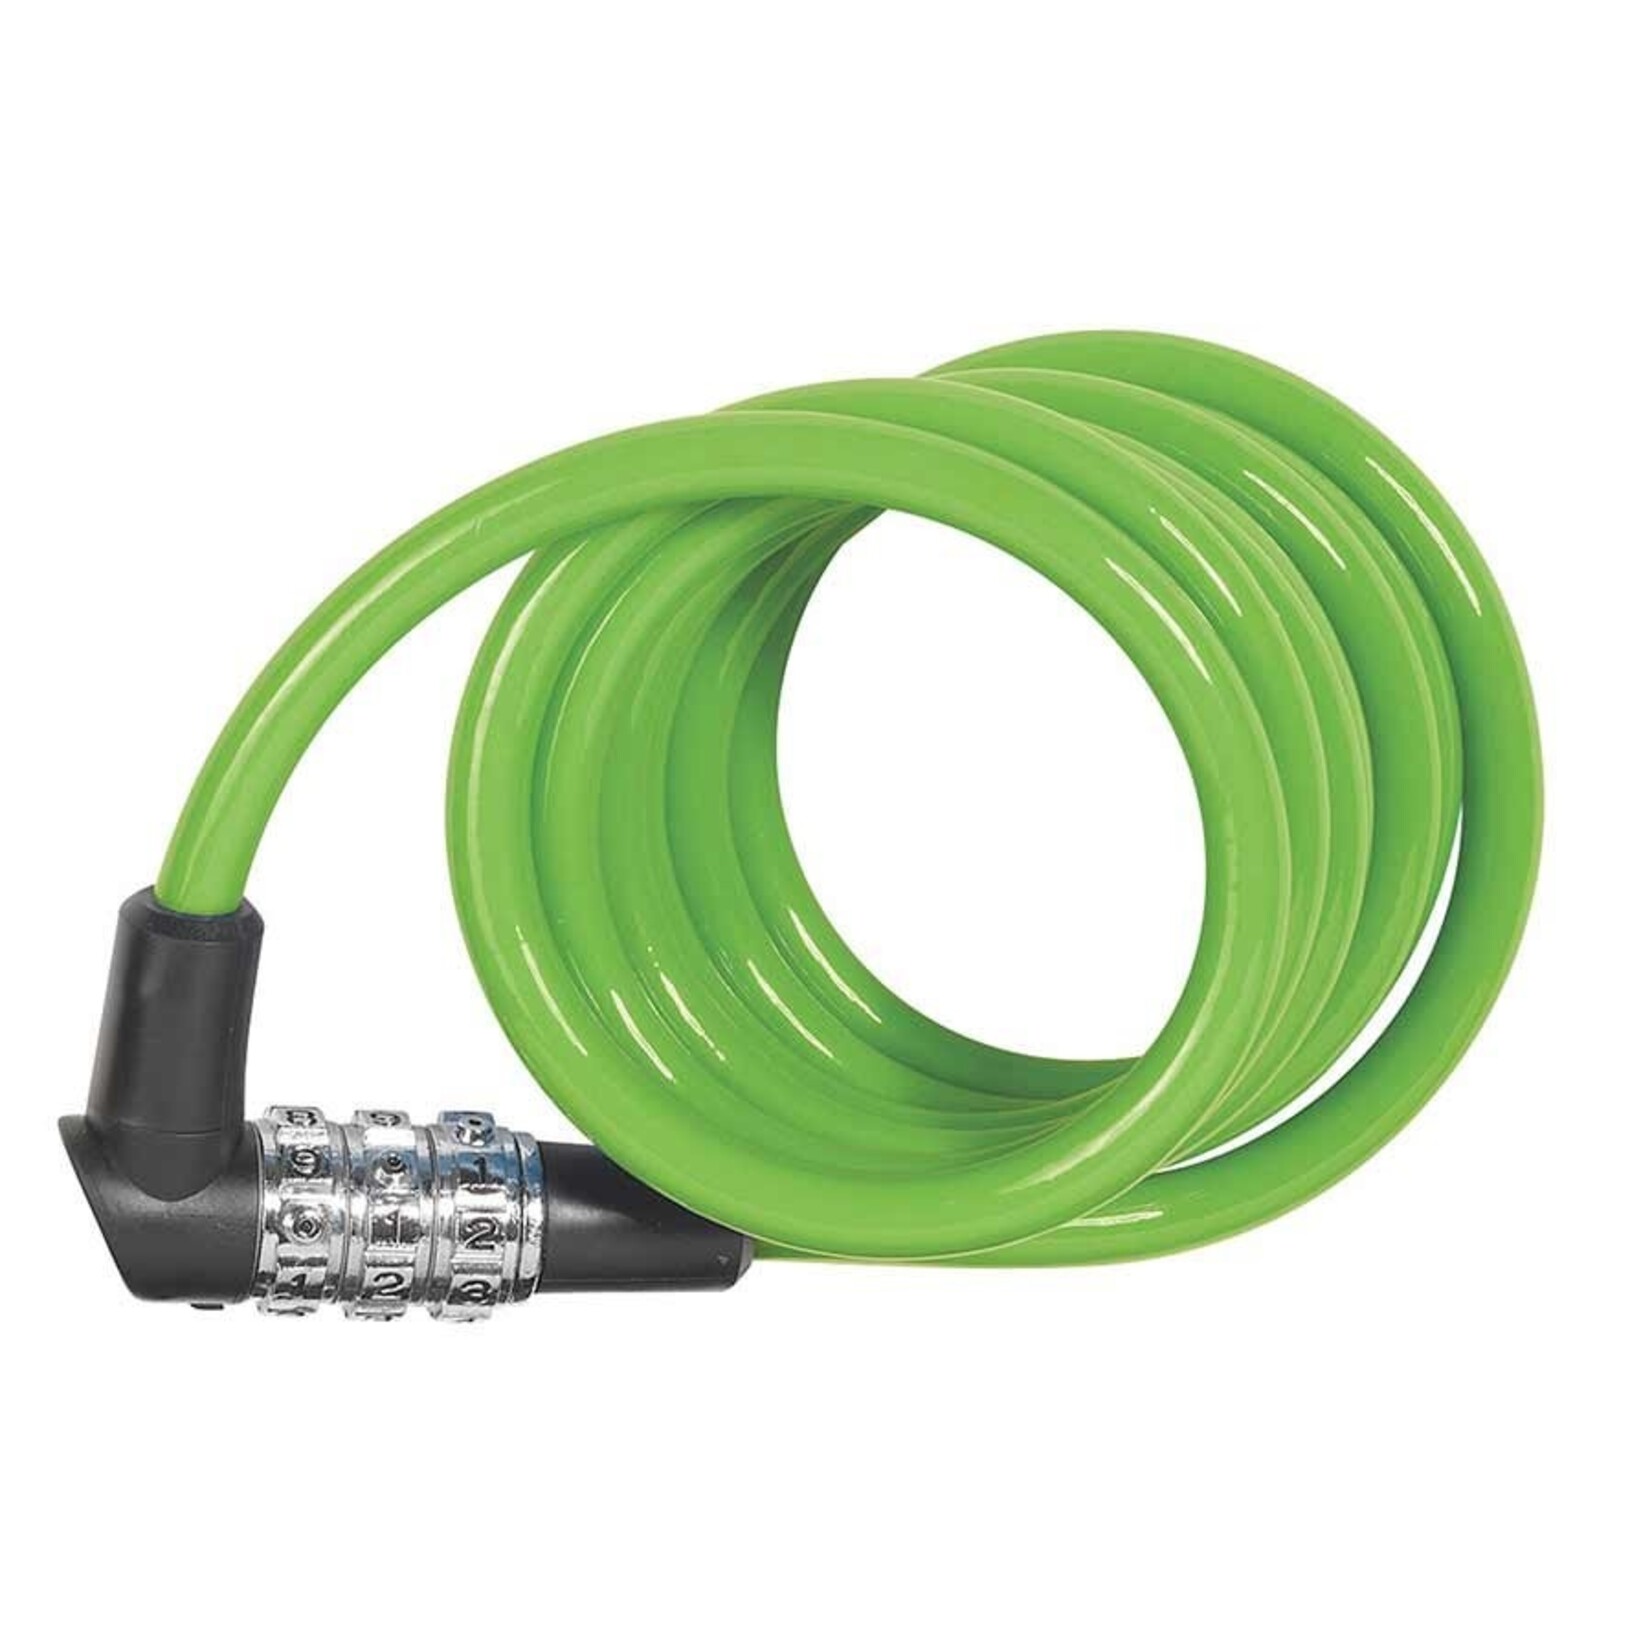 Abus ABUS, 1150 Kid's Combination Cable Lock